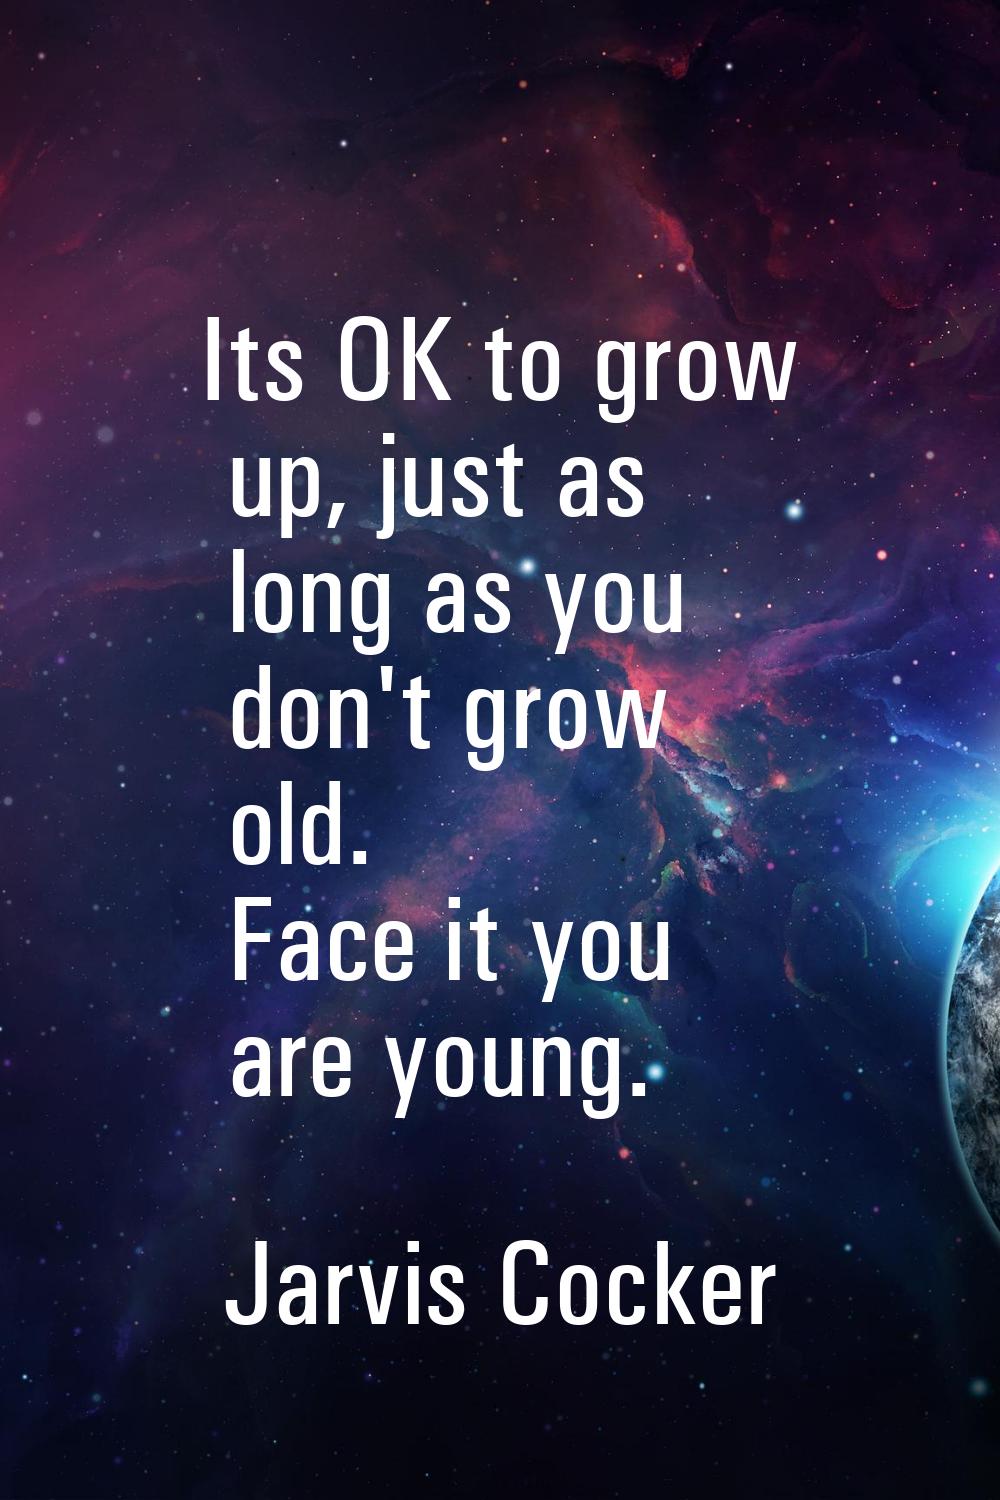 Its OK to grow up, just as long as you don't grow old. Face it you are young.